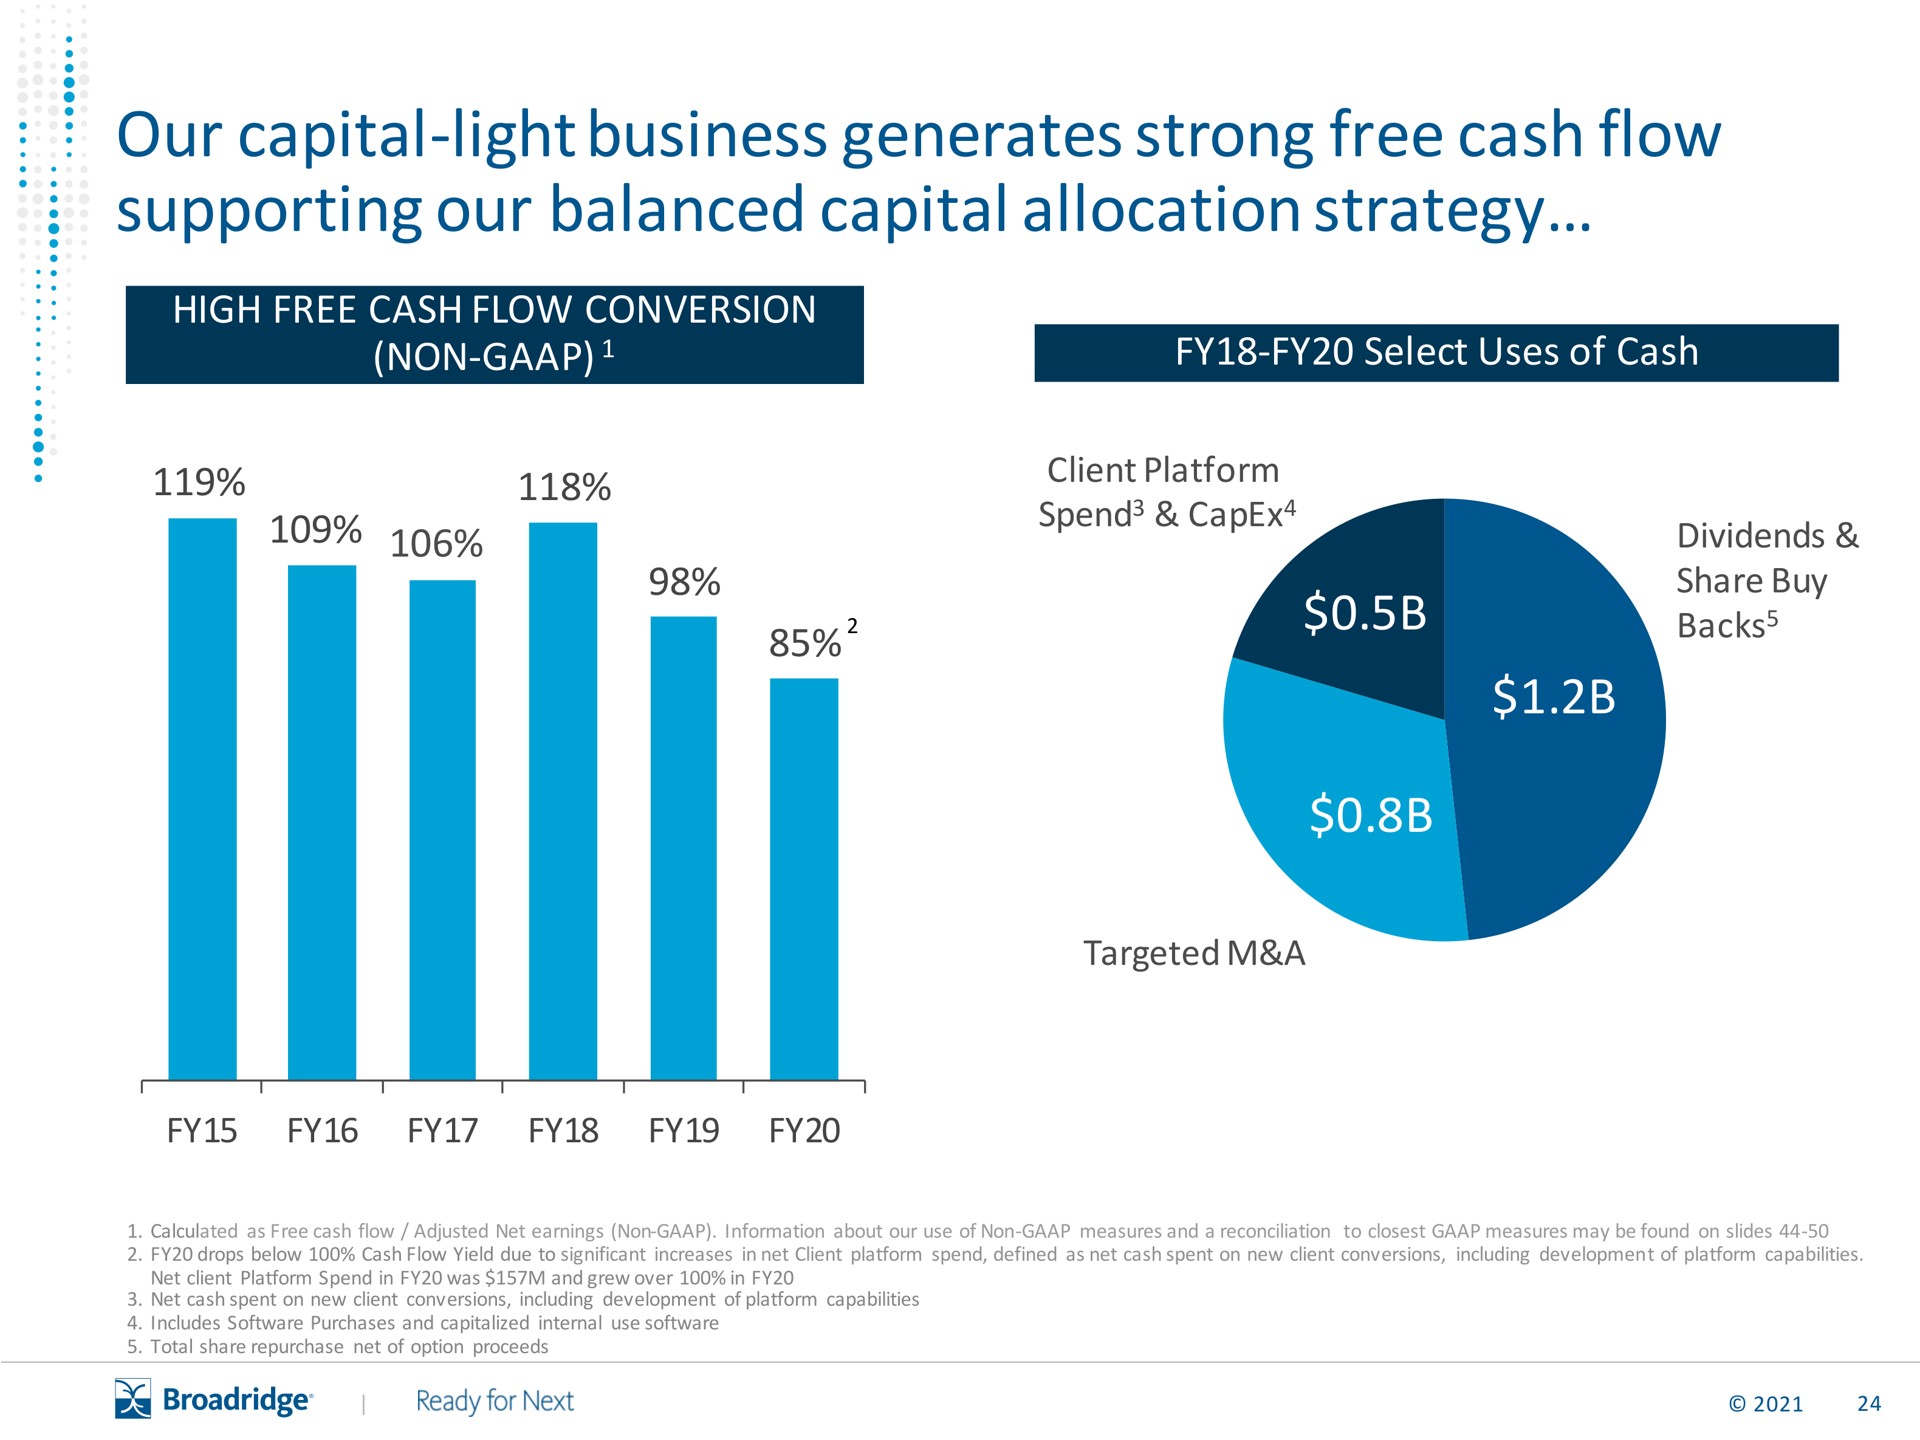 our capital light business generates strong free cash flow supporting our balanced capital allocation strategy | Broadridge Financial Solutions